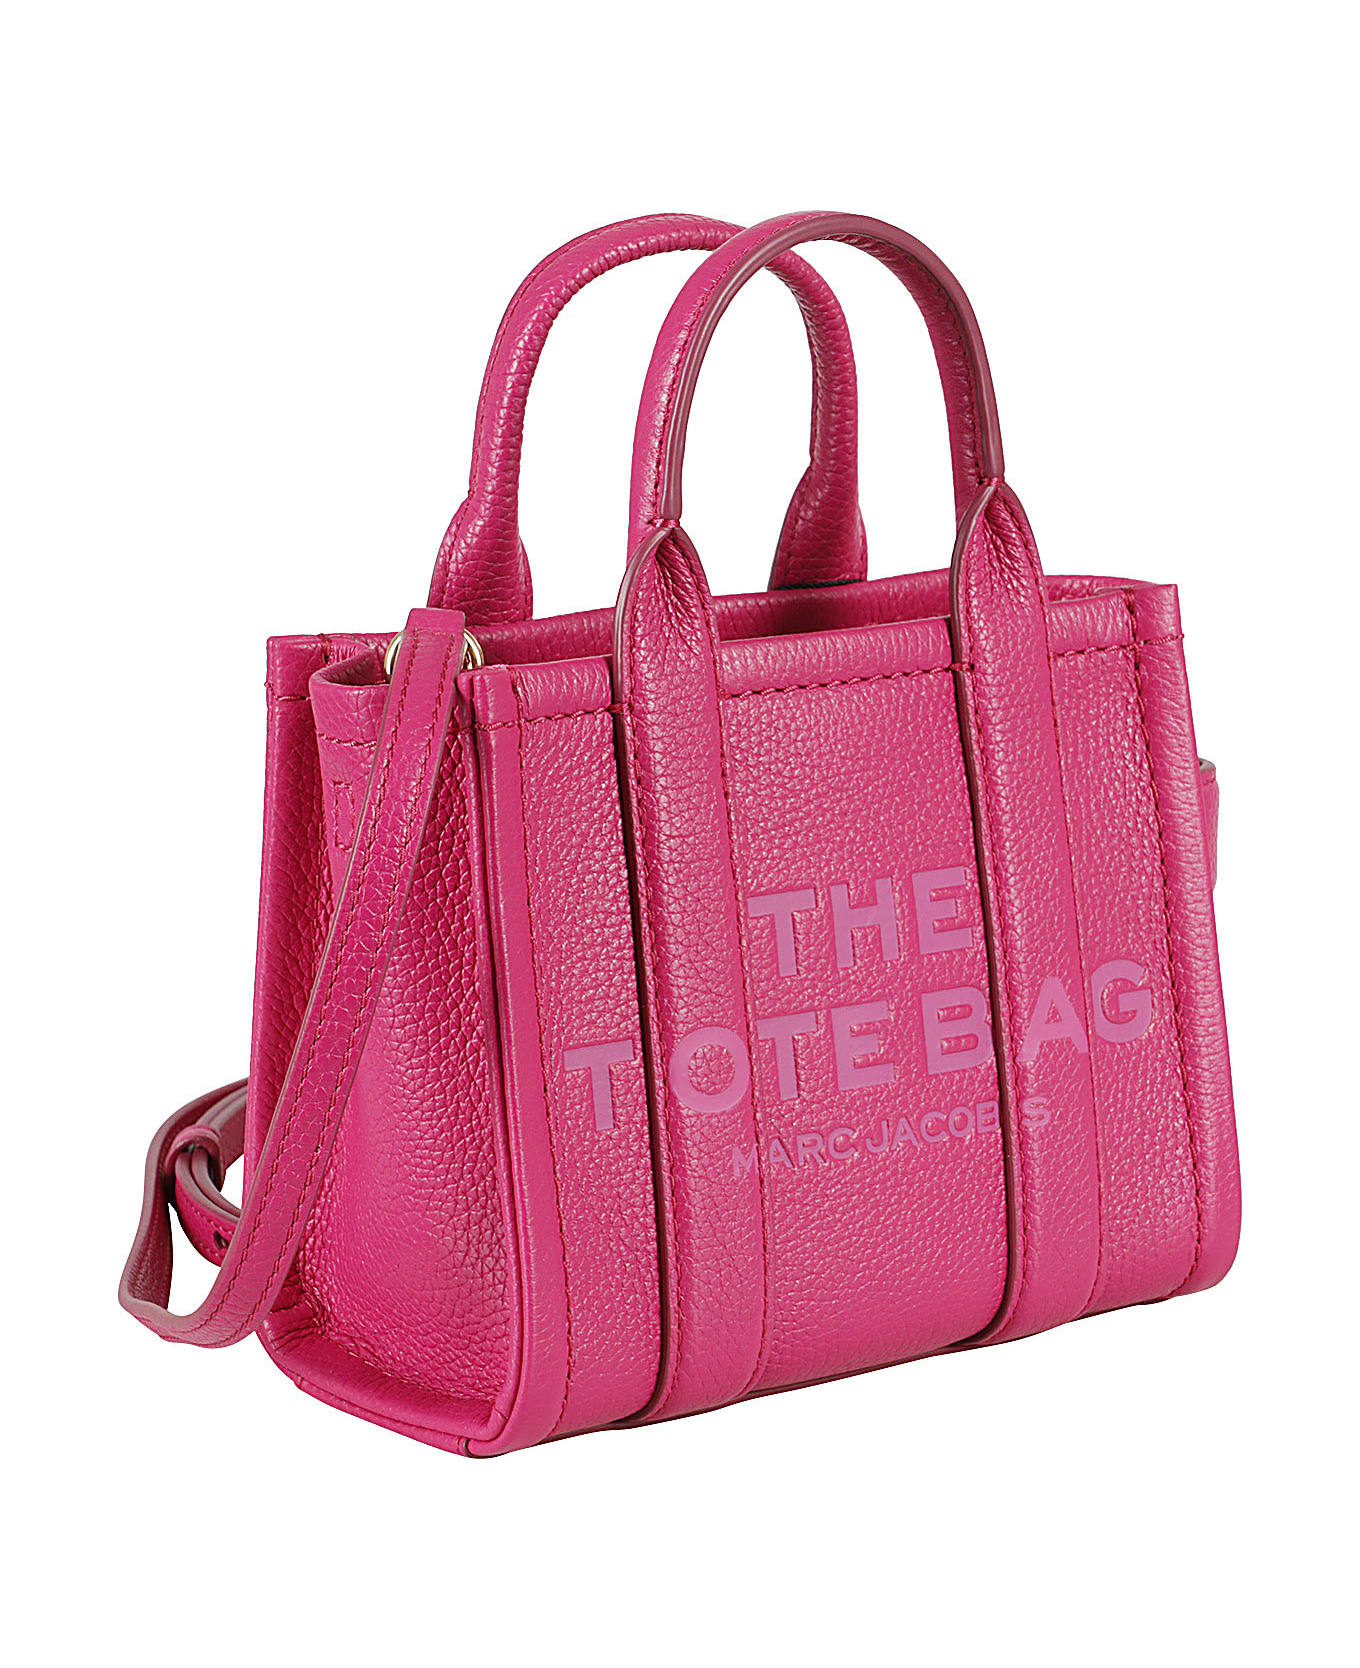 Marc Jacobs The Mini Tote - Lipstick Pink